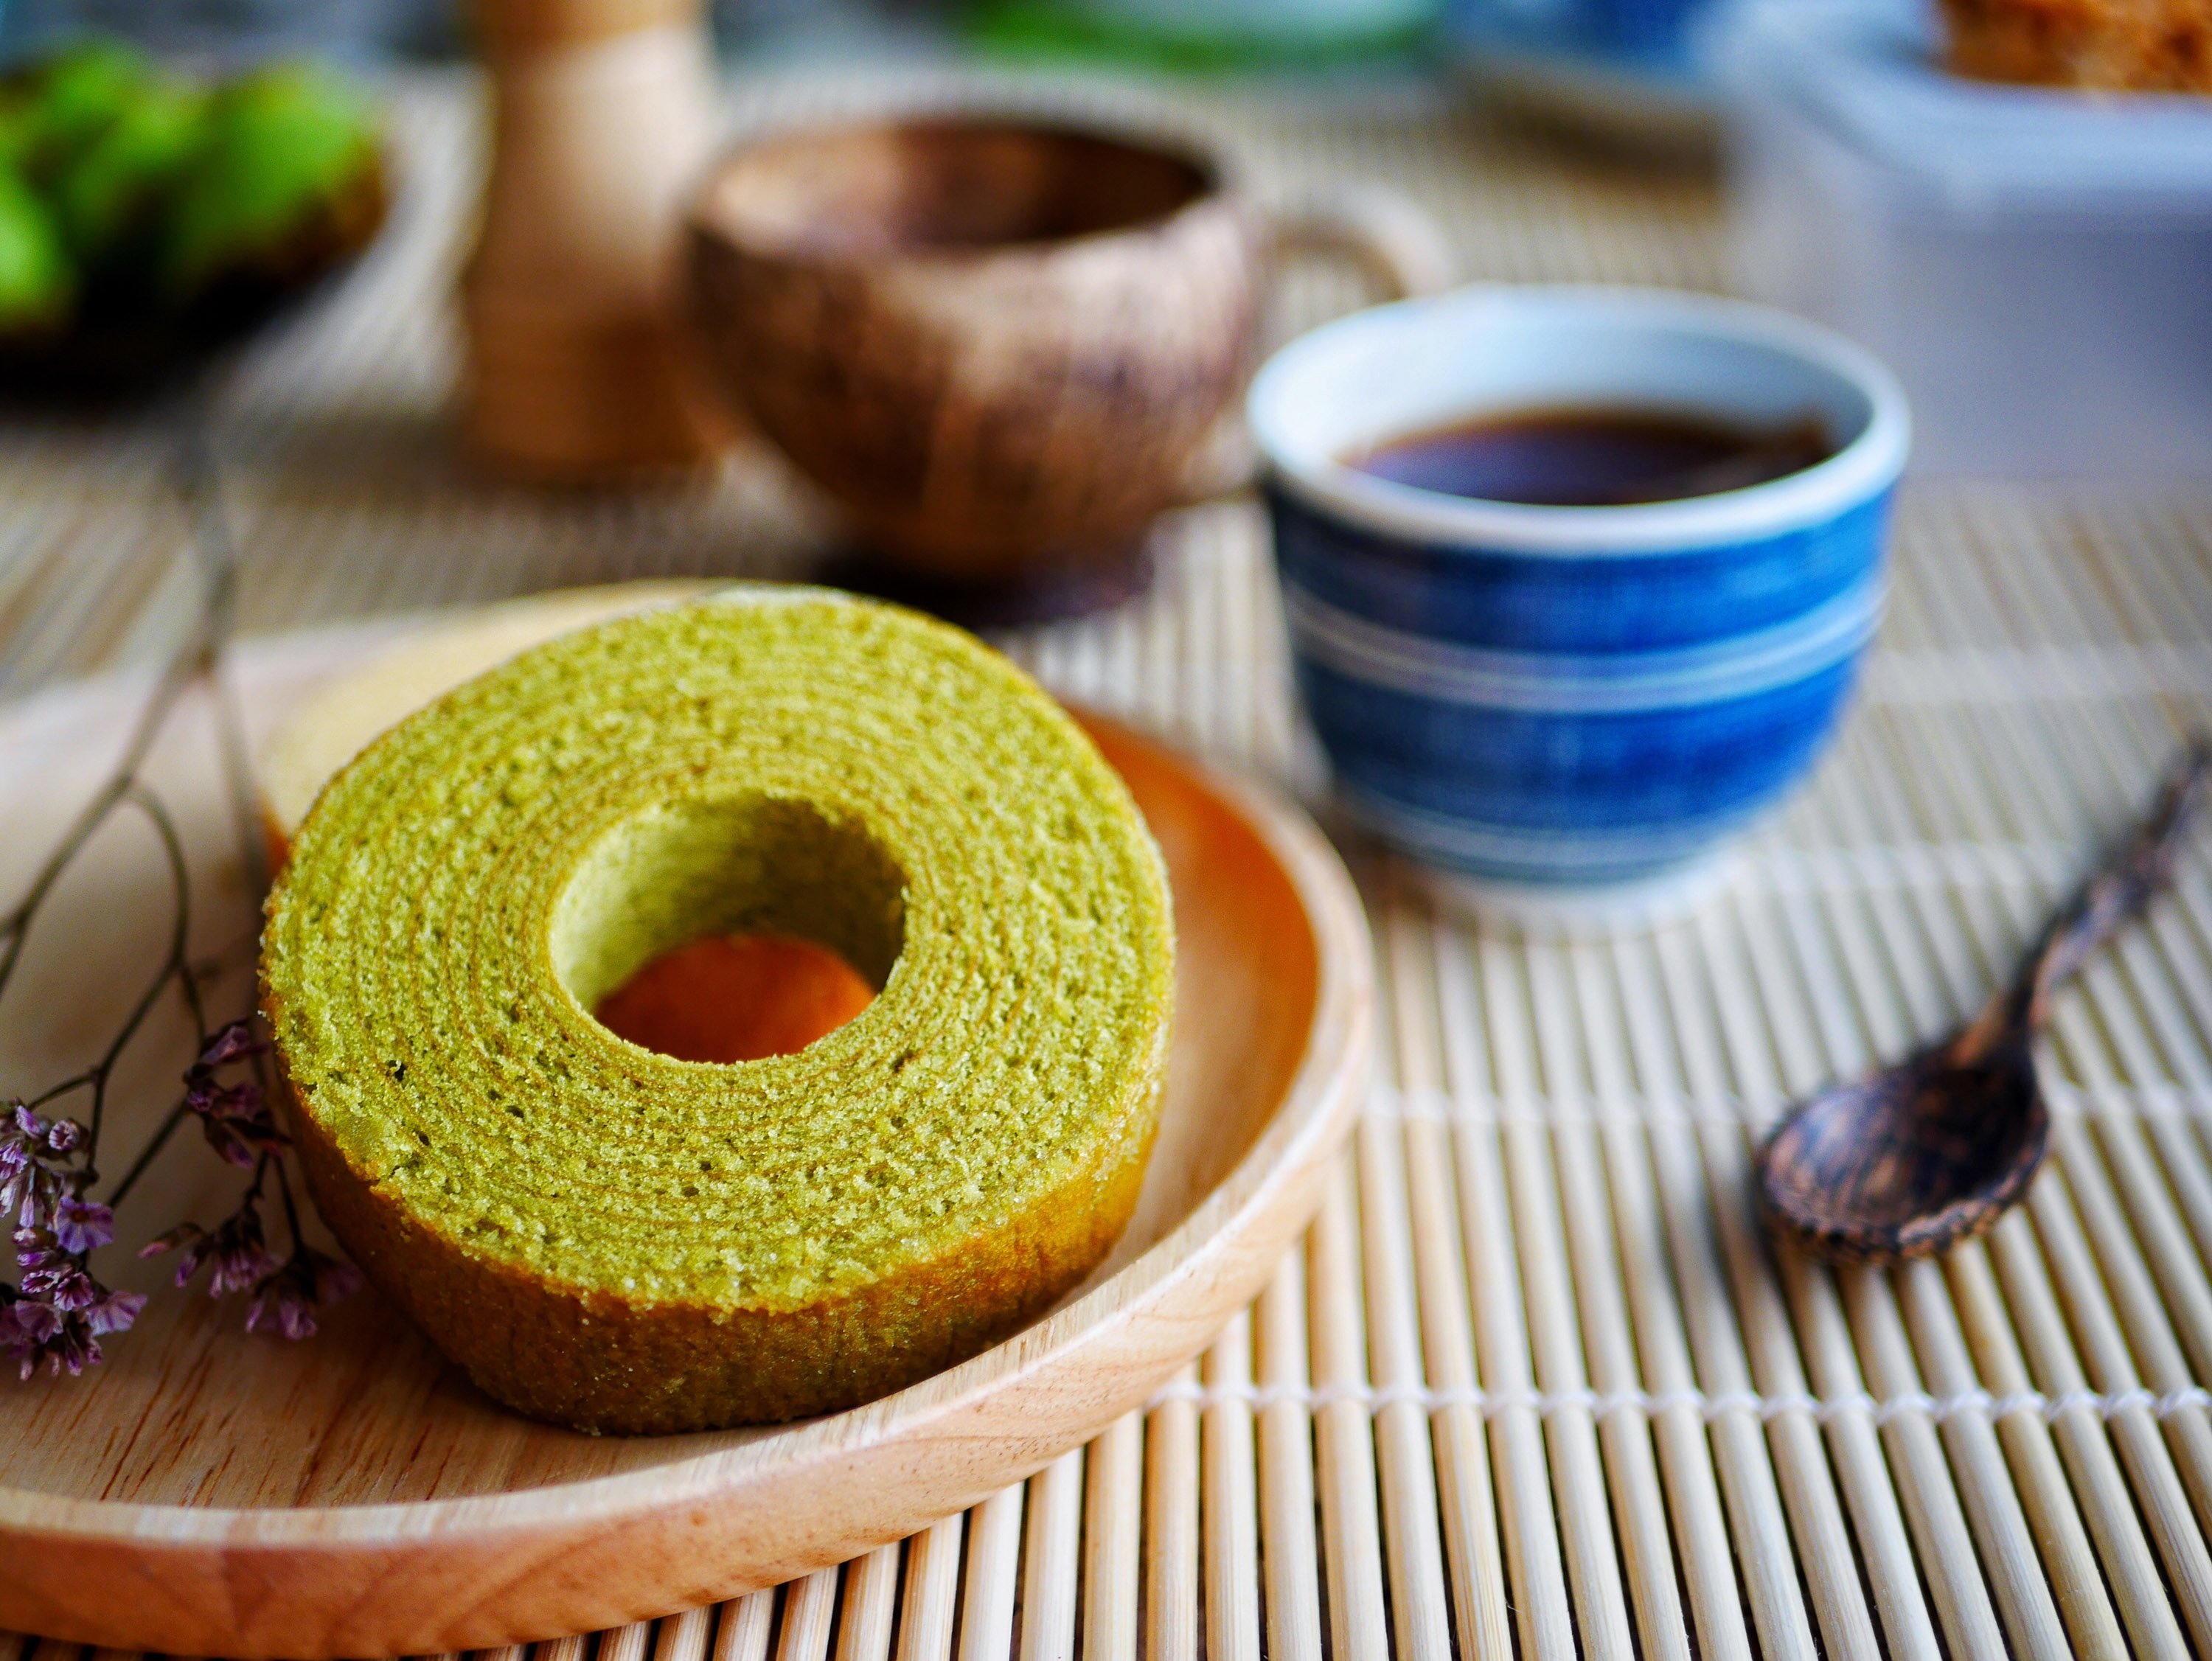 The Japanese make many variations of Baumkuchen, including green matcha-infused ones (pictured). (Shutterstock Photo)